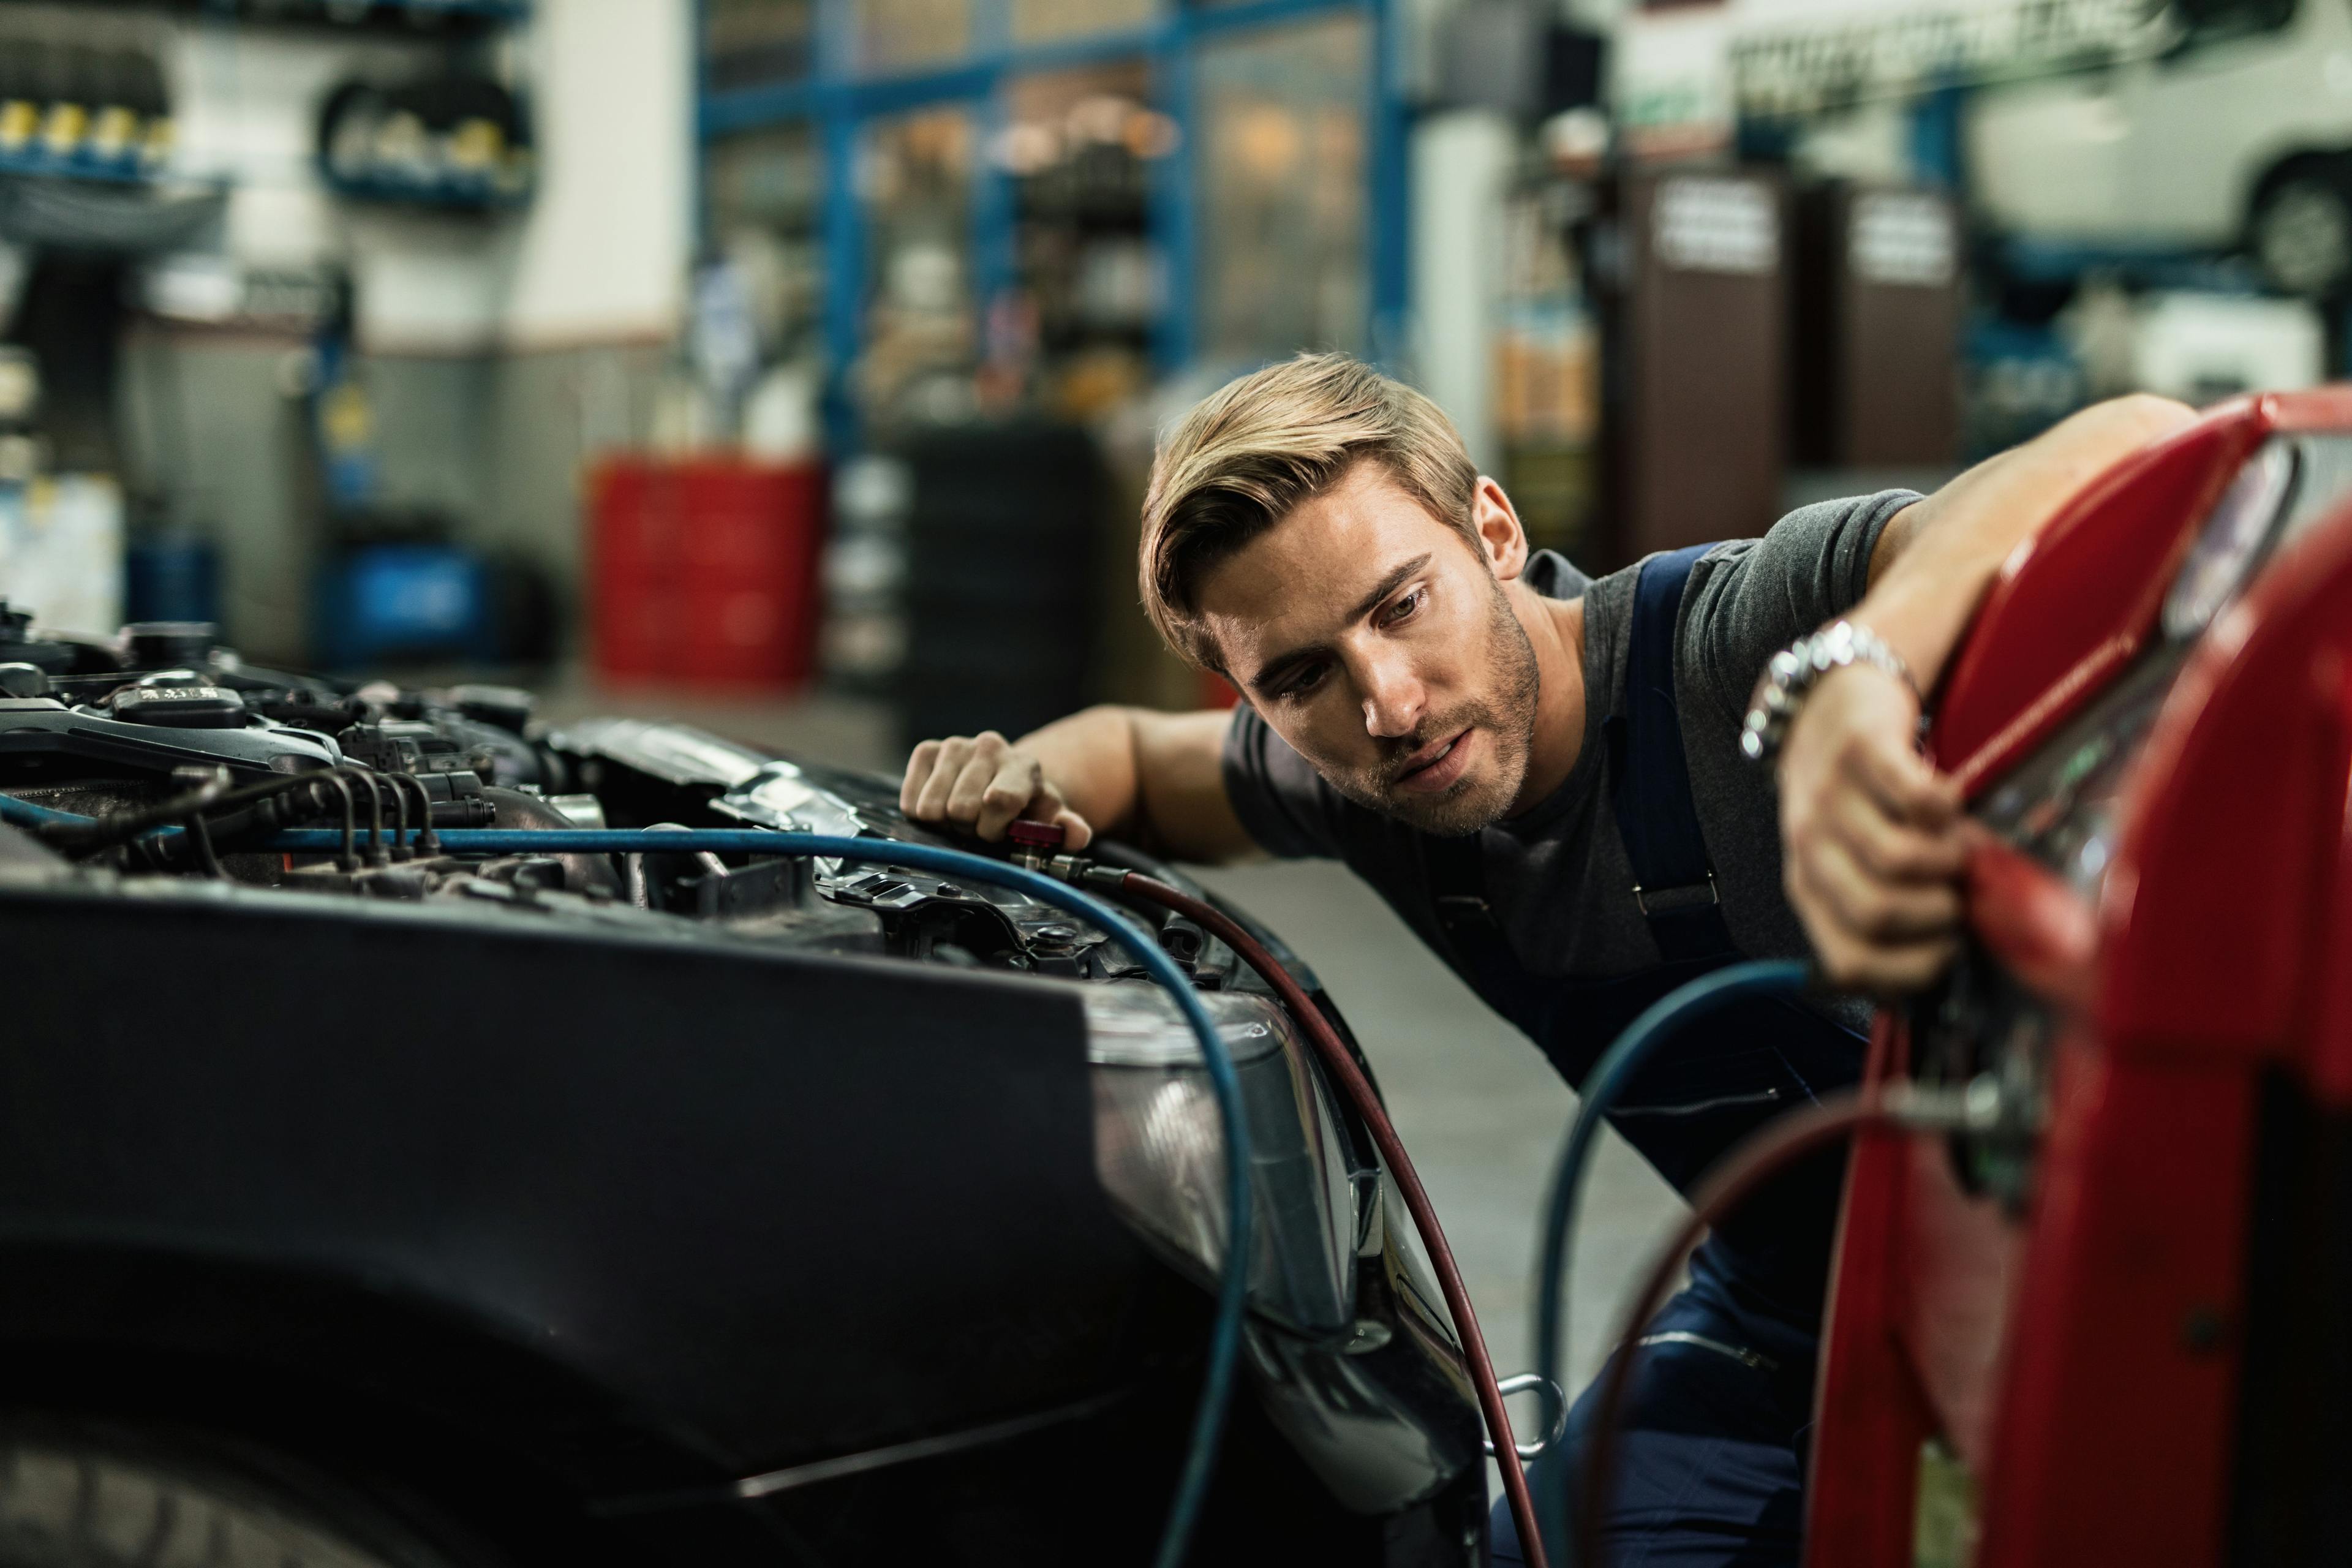 https://wsa-website-assets.s3.amazonaws.com/assets/images/young-auto-mechanic-using-compressor-while-maintaining-ac-unit-car-workshop.jpg